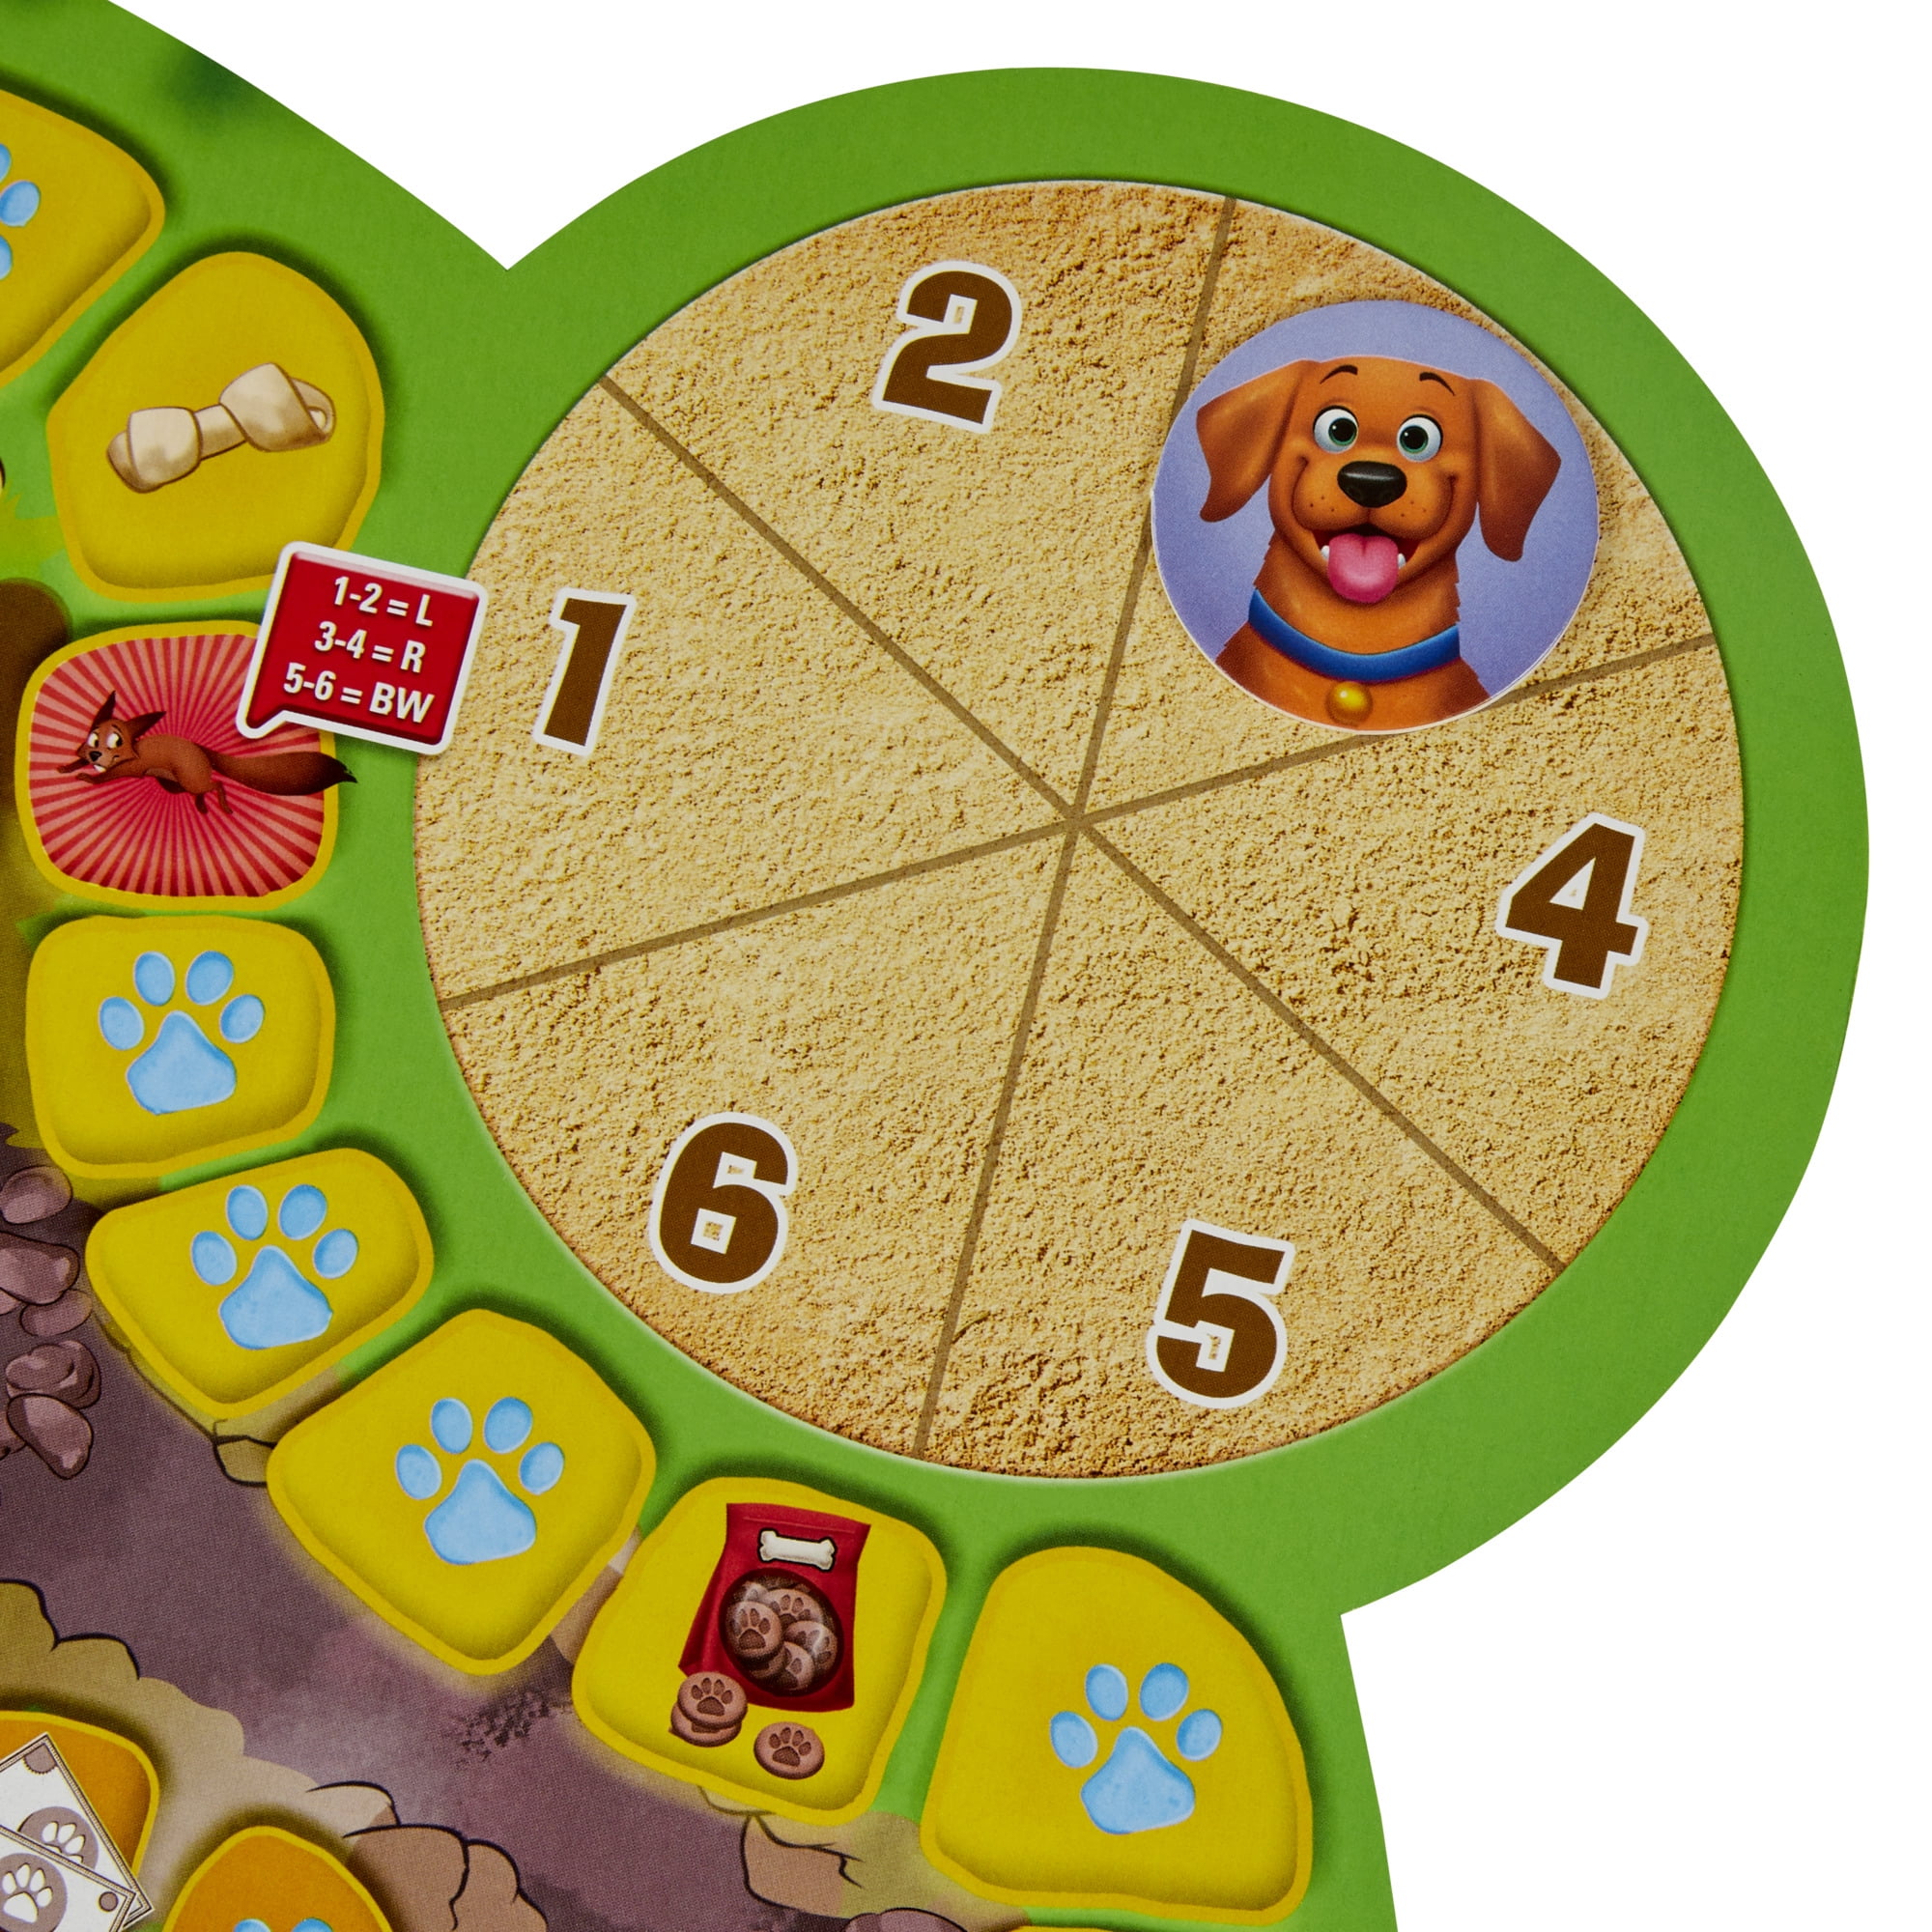 TABLETOP PREVIEW: A Dog's Life — Walk a Mile in their Paws, by Board Games  & Life Aims